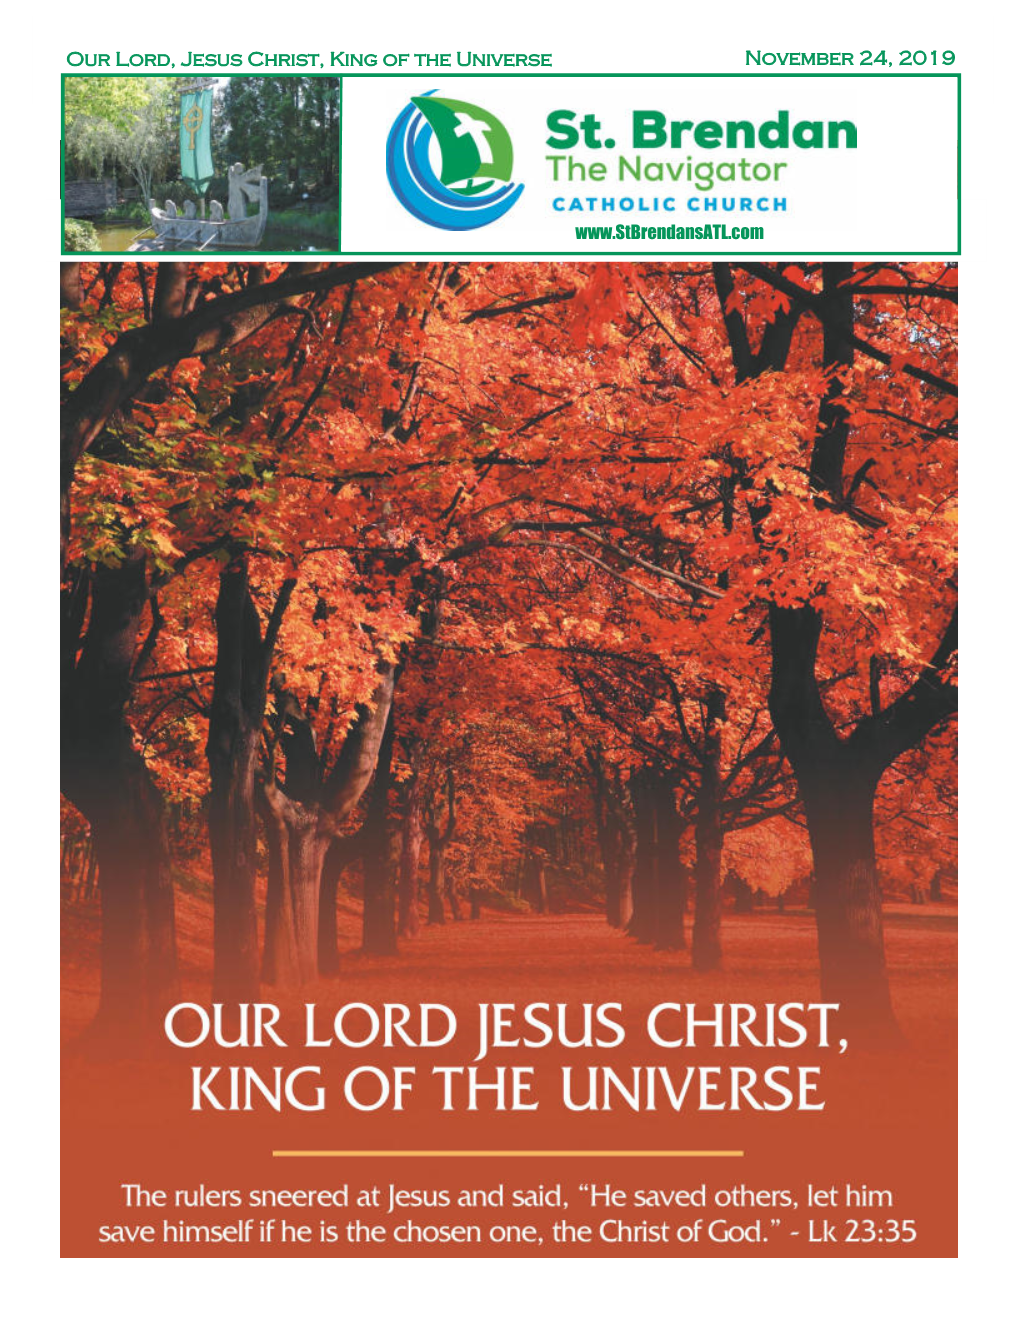 Our Lord, Jesus Christ, King of the Universe November 24, 2019